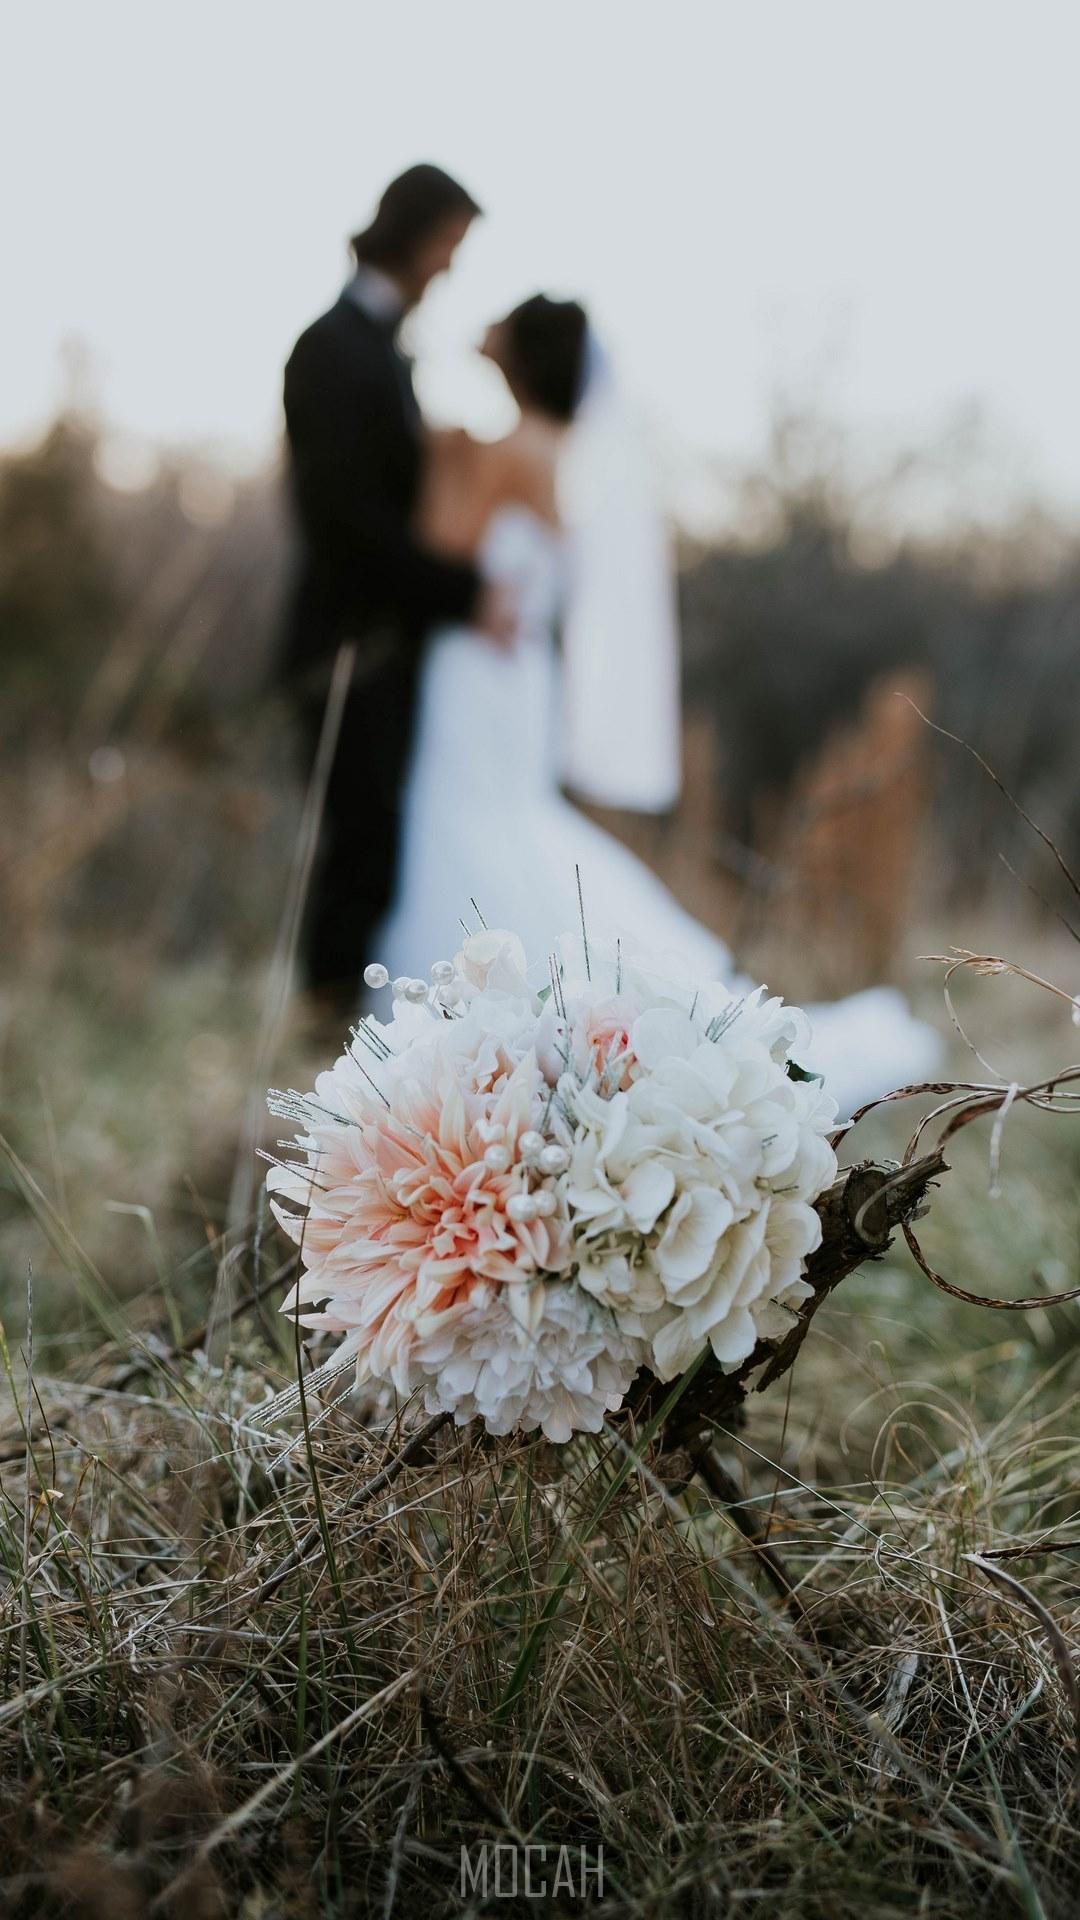 HD wallpaper, A Bouquet Sits In Tall Grass While A Married Couple Embraces In The Fuzzy Background, Samsung Galaxy J7 Prime Screensaver, 1080X1920, Wedding Evening